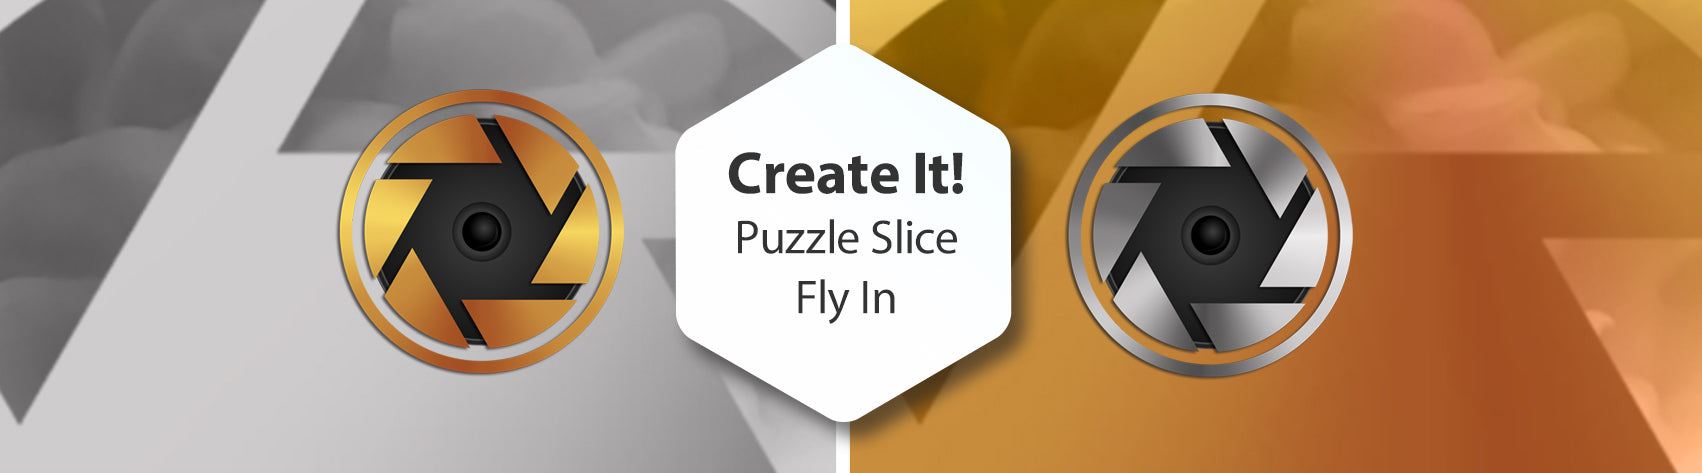 Create It! Puzzle Slice Fly In